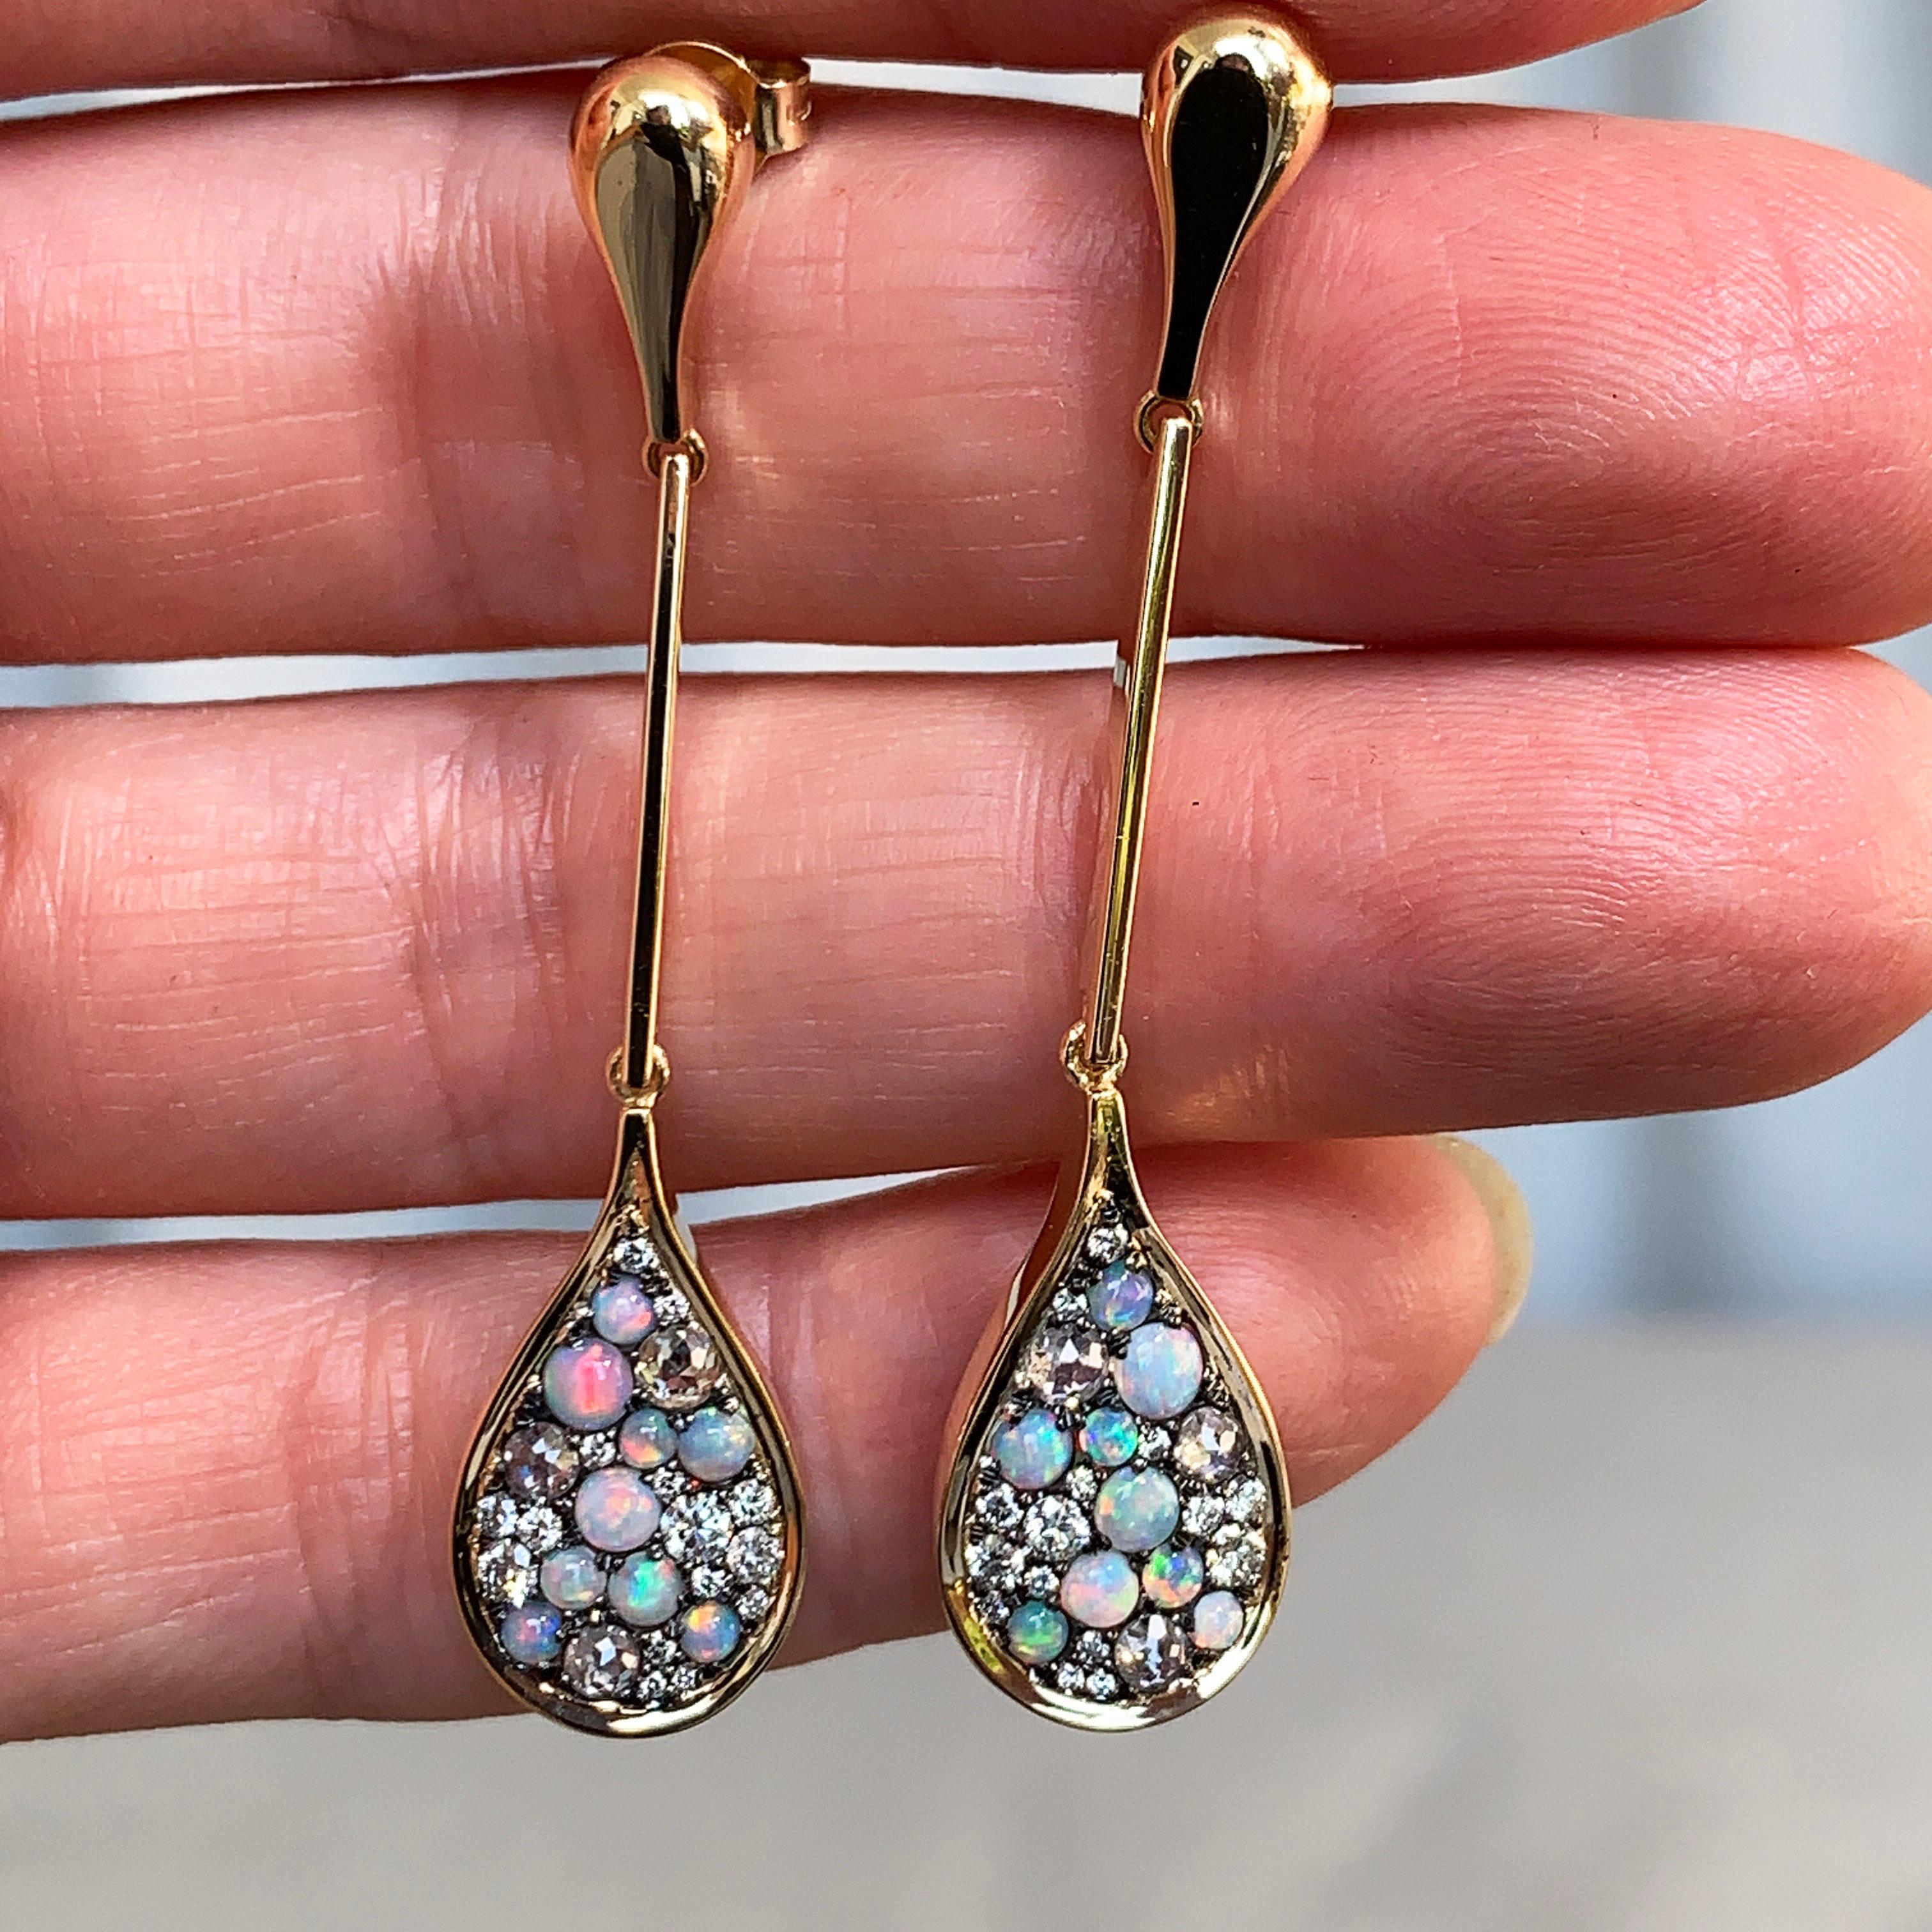 One of a kind earrings handmade in Belgium by jewelry artist Joke Quick, in 18K yellow gold 10 g & blackened sterling silver 3g (The stones are set on silver to create a black background for the stones) Pave set with Australian white opal cabochons,